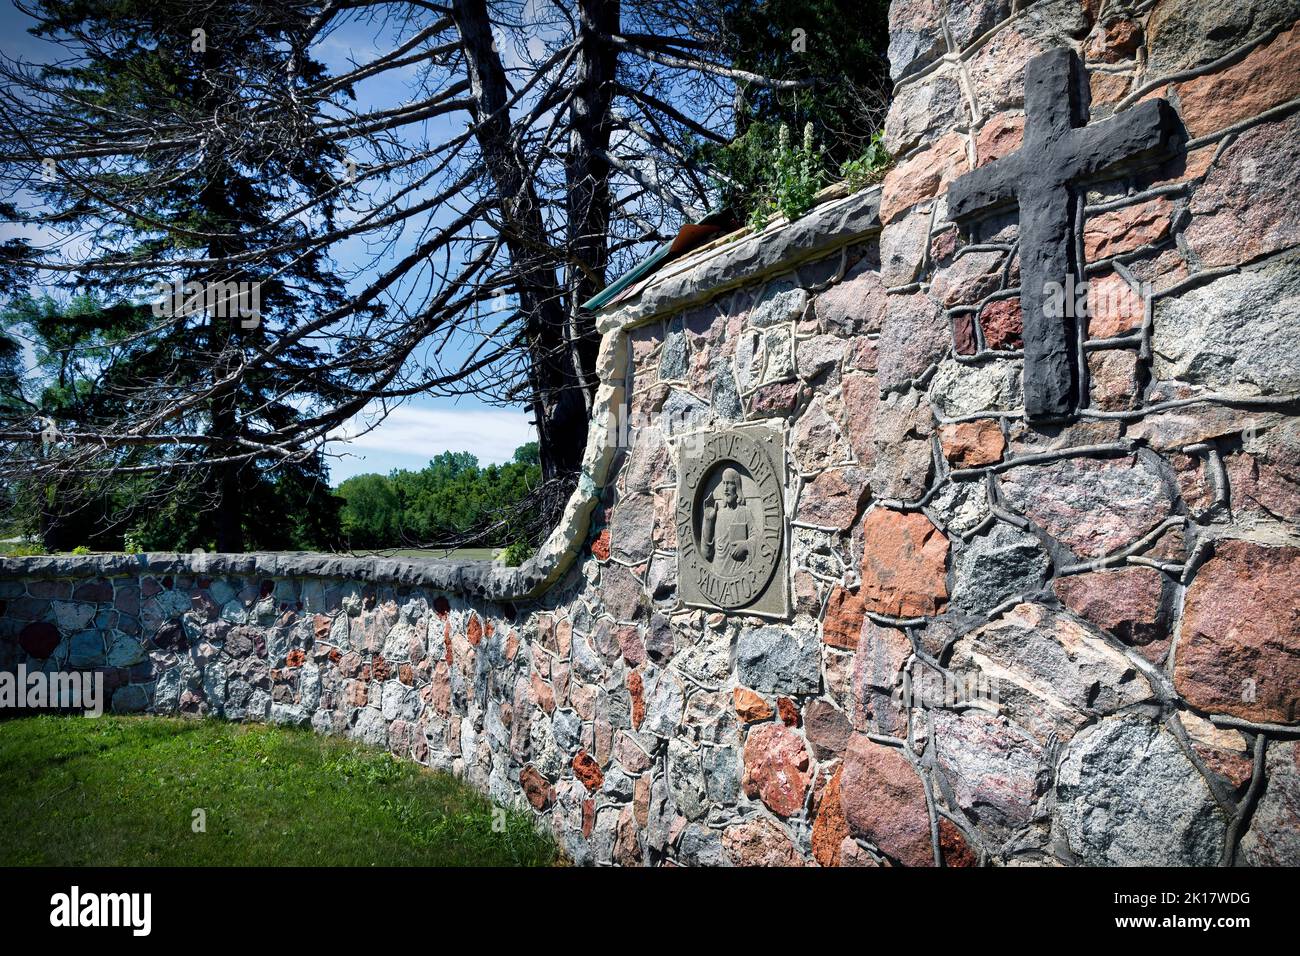 Part of an old wall, built with religious masonry, that stands in Saint Nazianz near Manitowoc, Wisconsin. Stock Photo